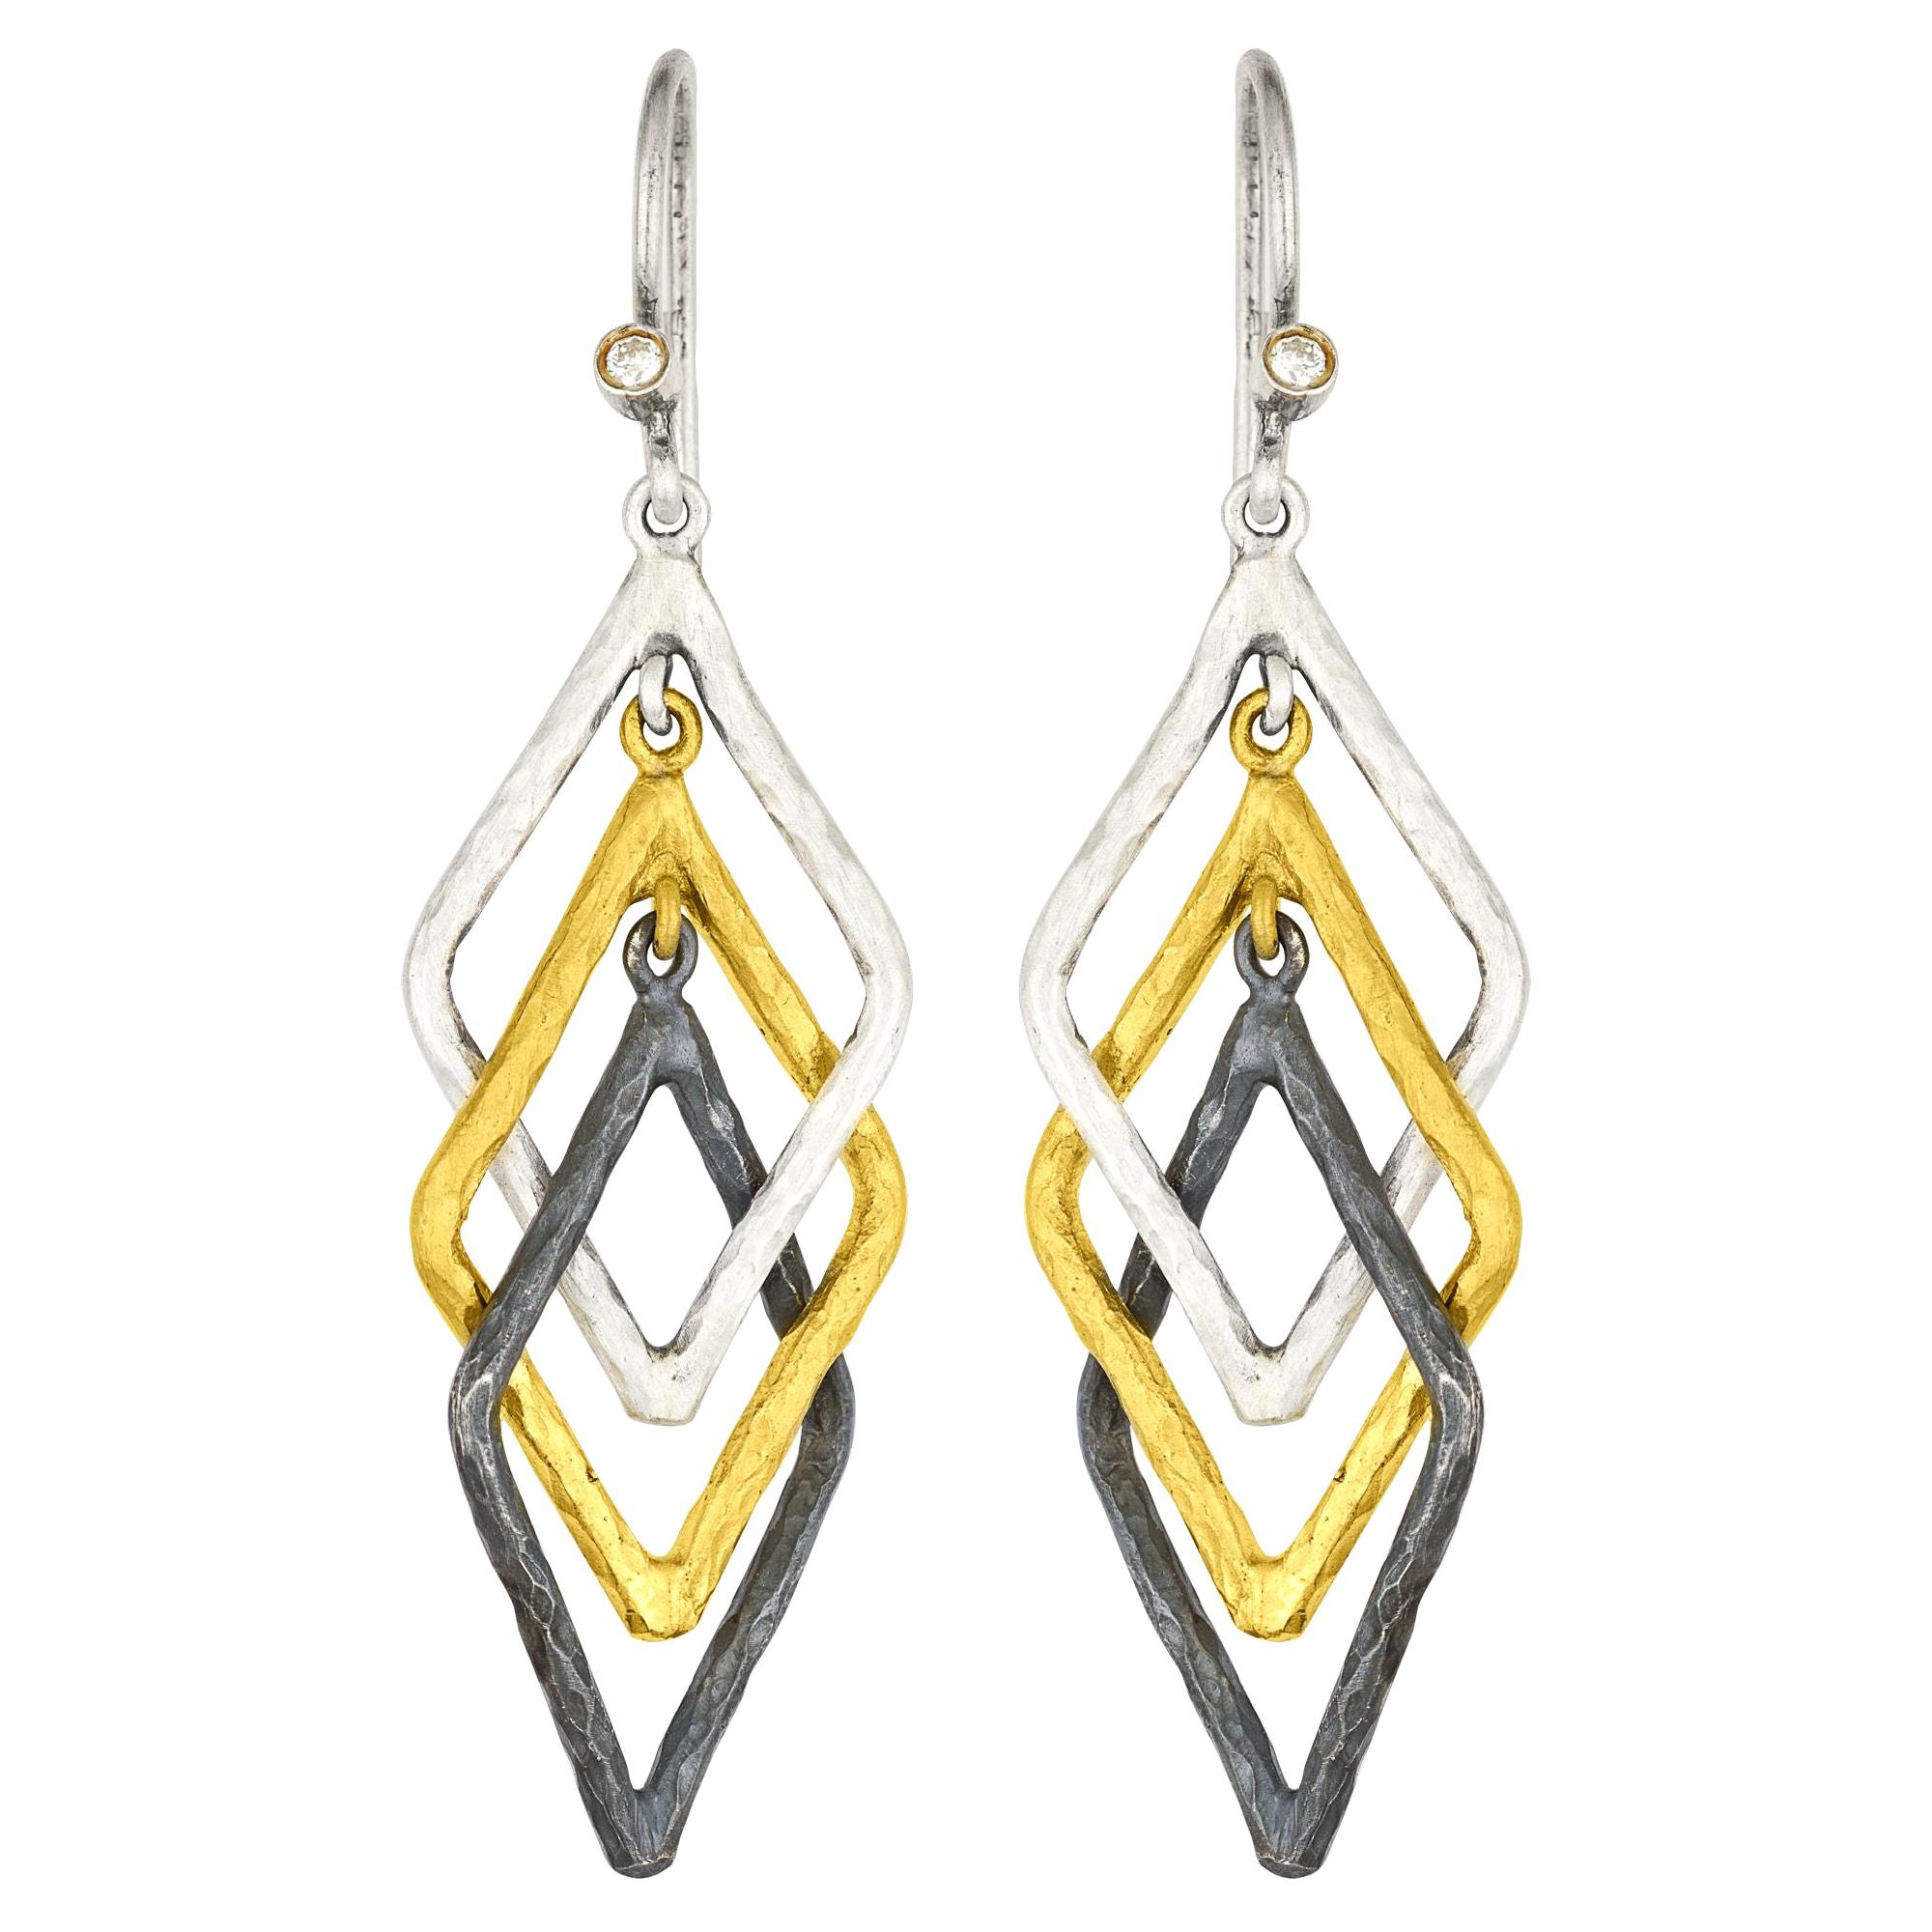 24K Sterling and Oxidized Silver Triple Kite Hoop Earring Drops with Diamonds For Sale